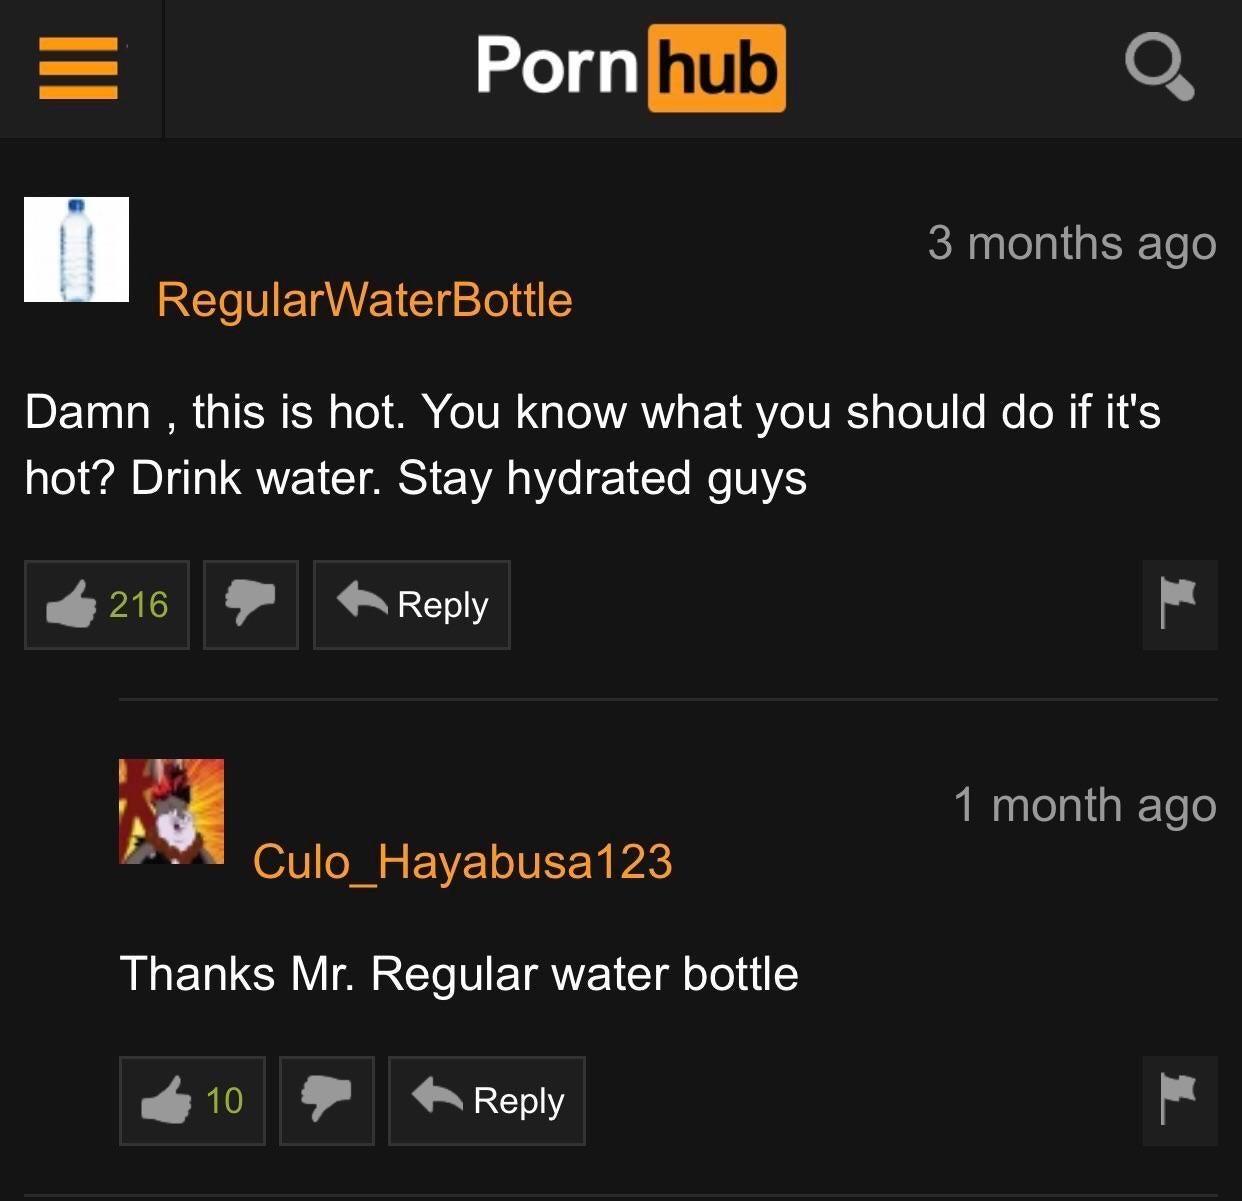 ph comments memes - Porn hub 3 months ago RegularWater Bottle Damn , this is hot. You know what you should do if it's hot? Drink water. Stay hydrated guys 216 1 month ago Culo_Hayabusa123 Thanks Mr. Regular water bottle 10